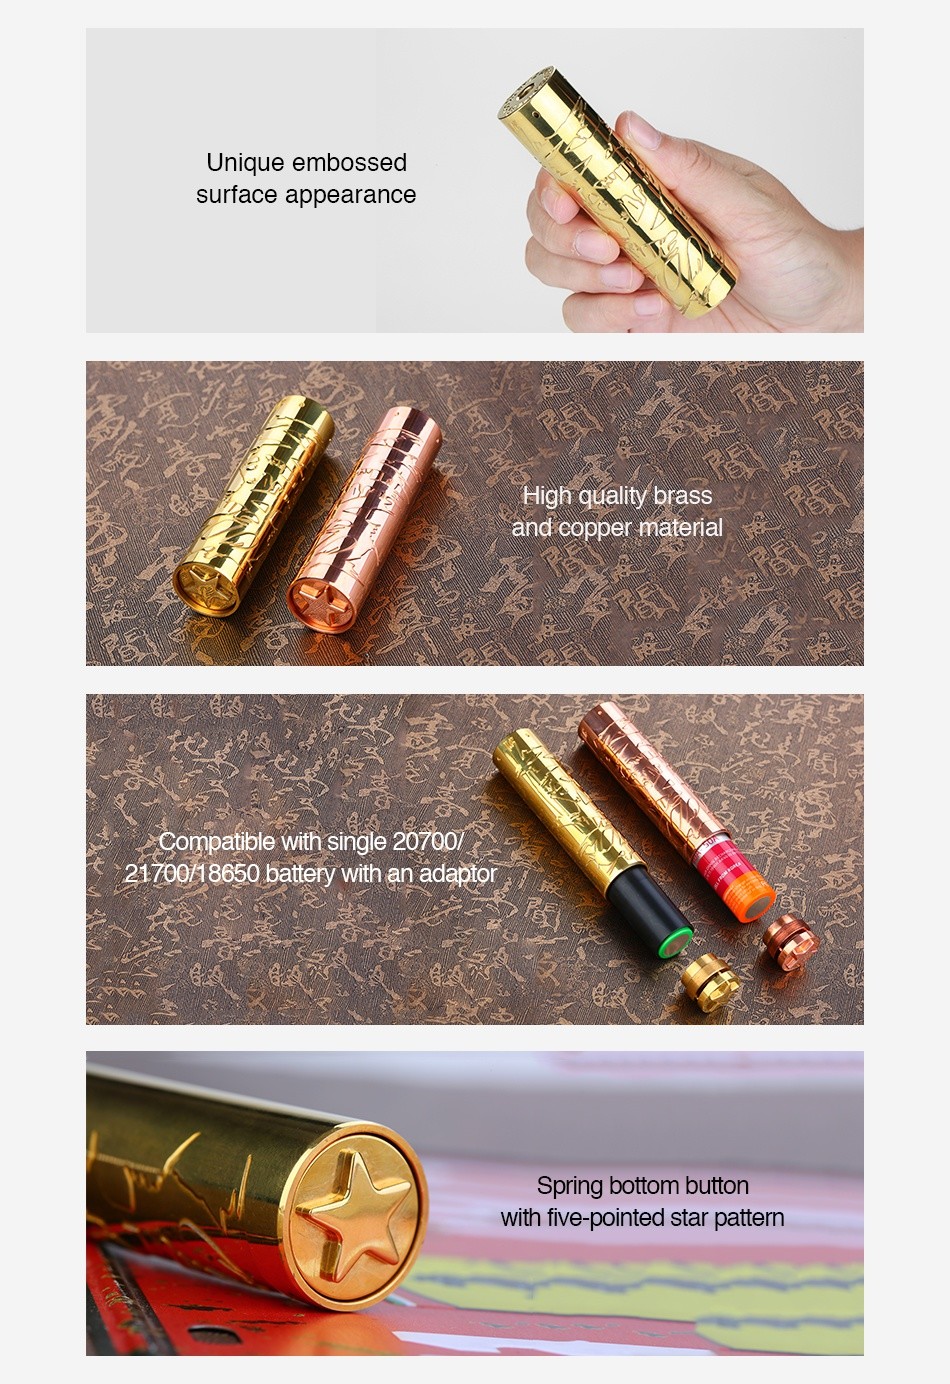 Timesvape Saint Mech MOD Unique embossed surface appearance High quality brass and copper material Compatible with single 20700 21700 18650 battery with an adaptor Spring bottom button with five pointed star pattern